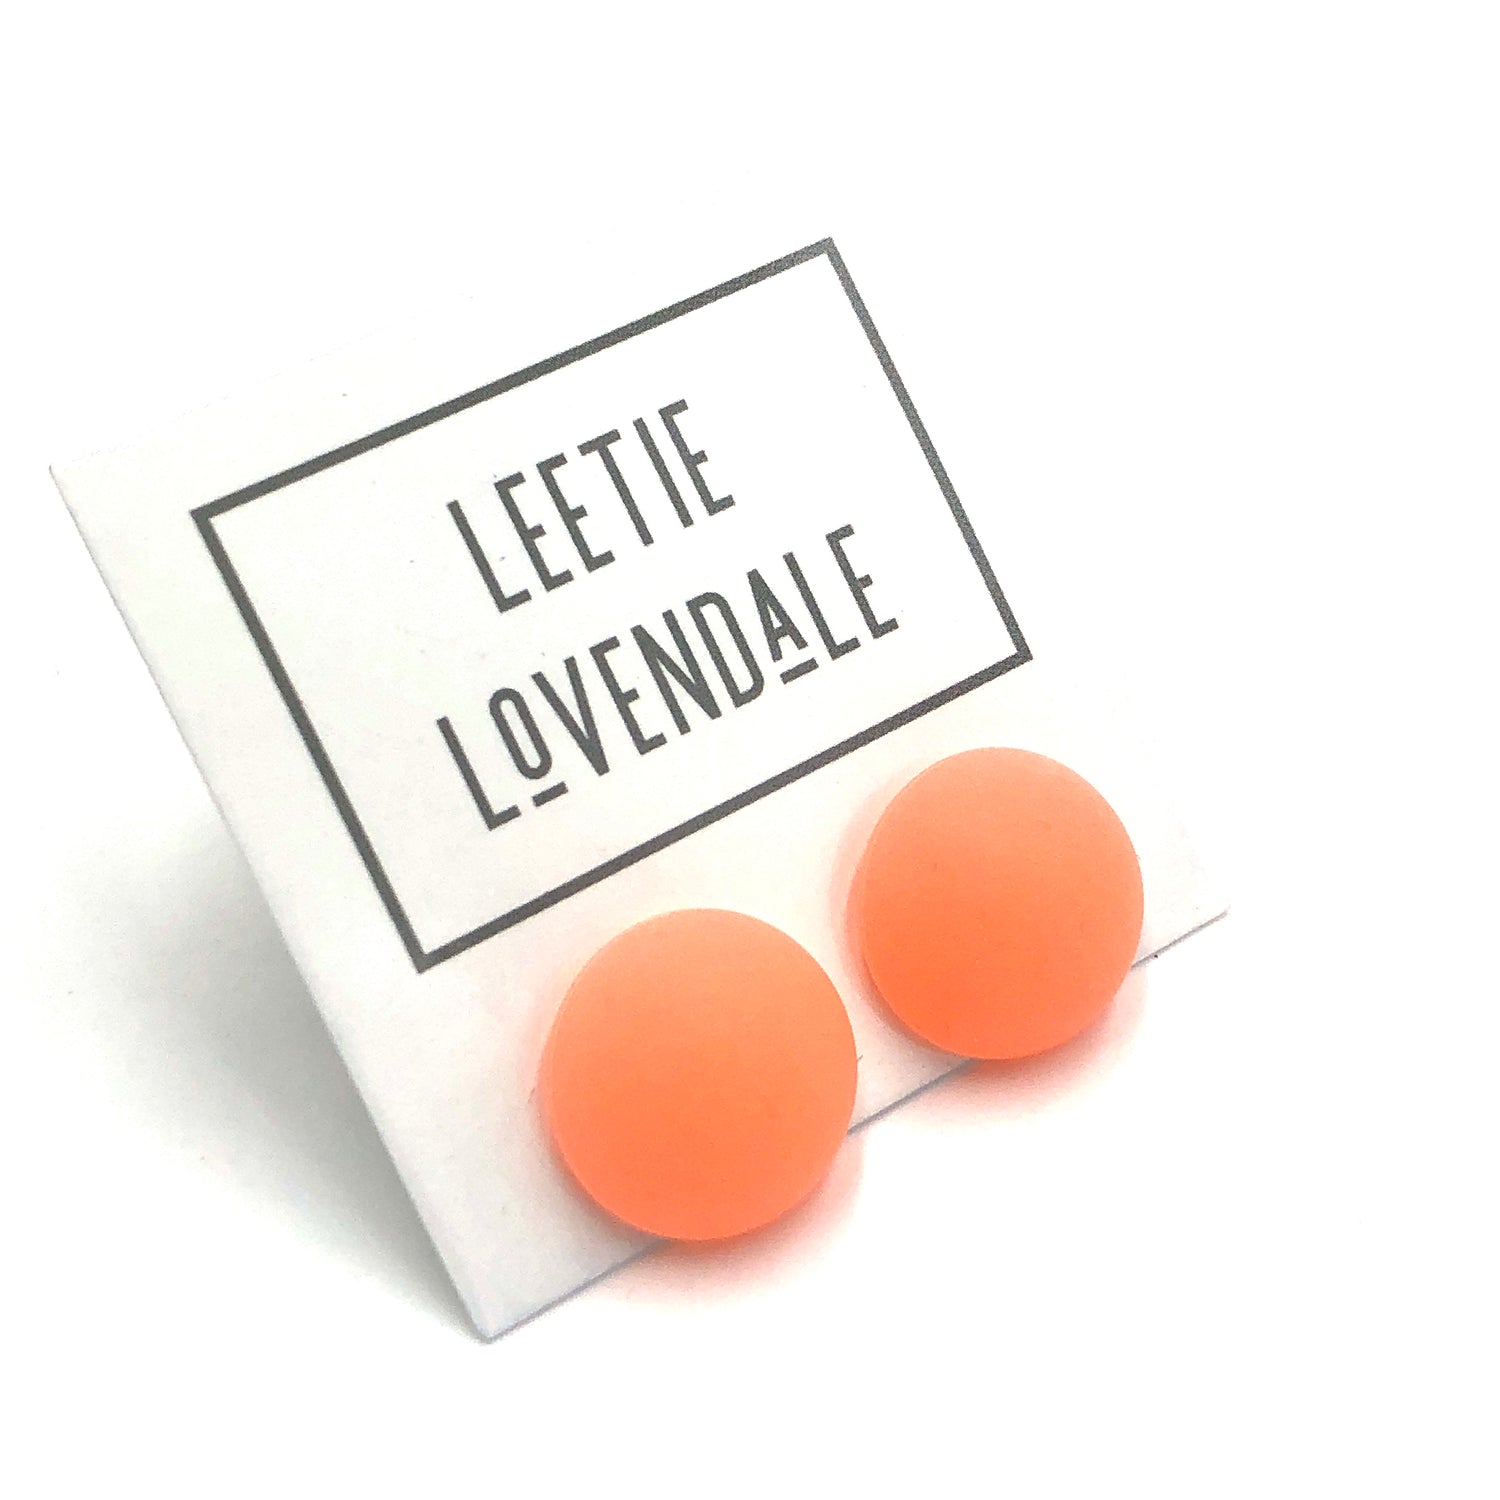 Coral Frosted Retro Button Stud Earrings